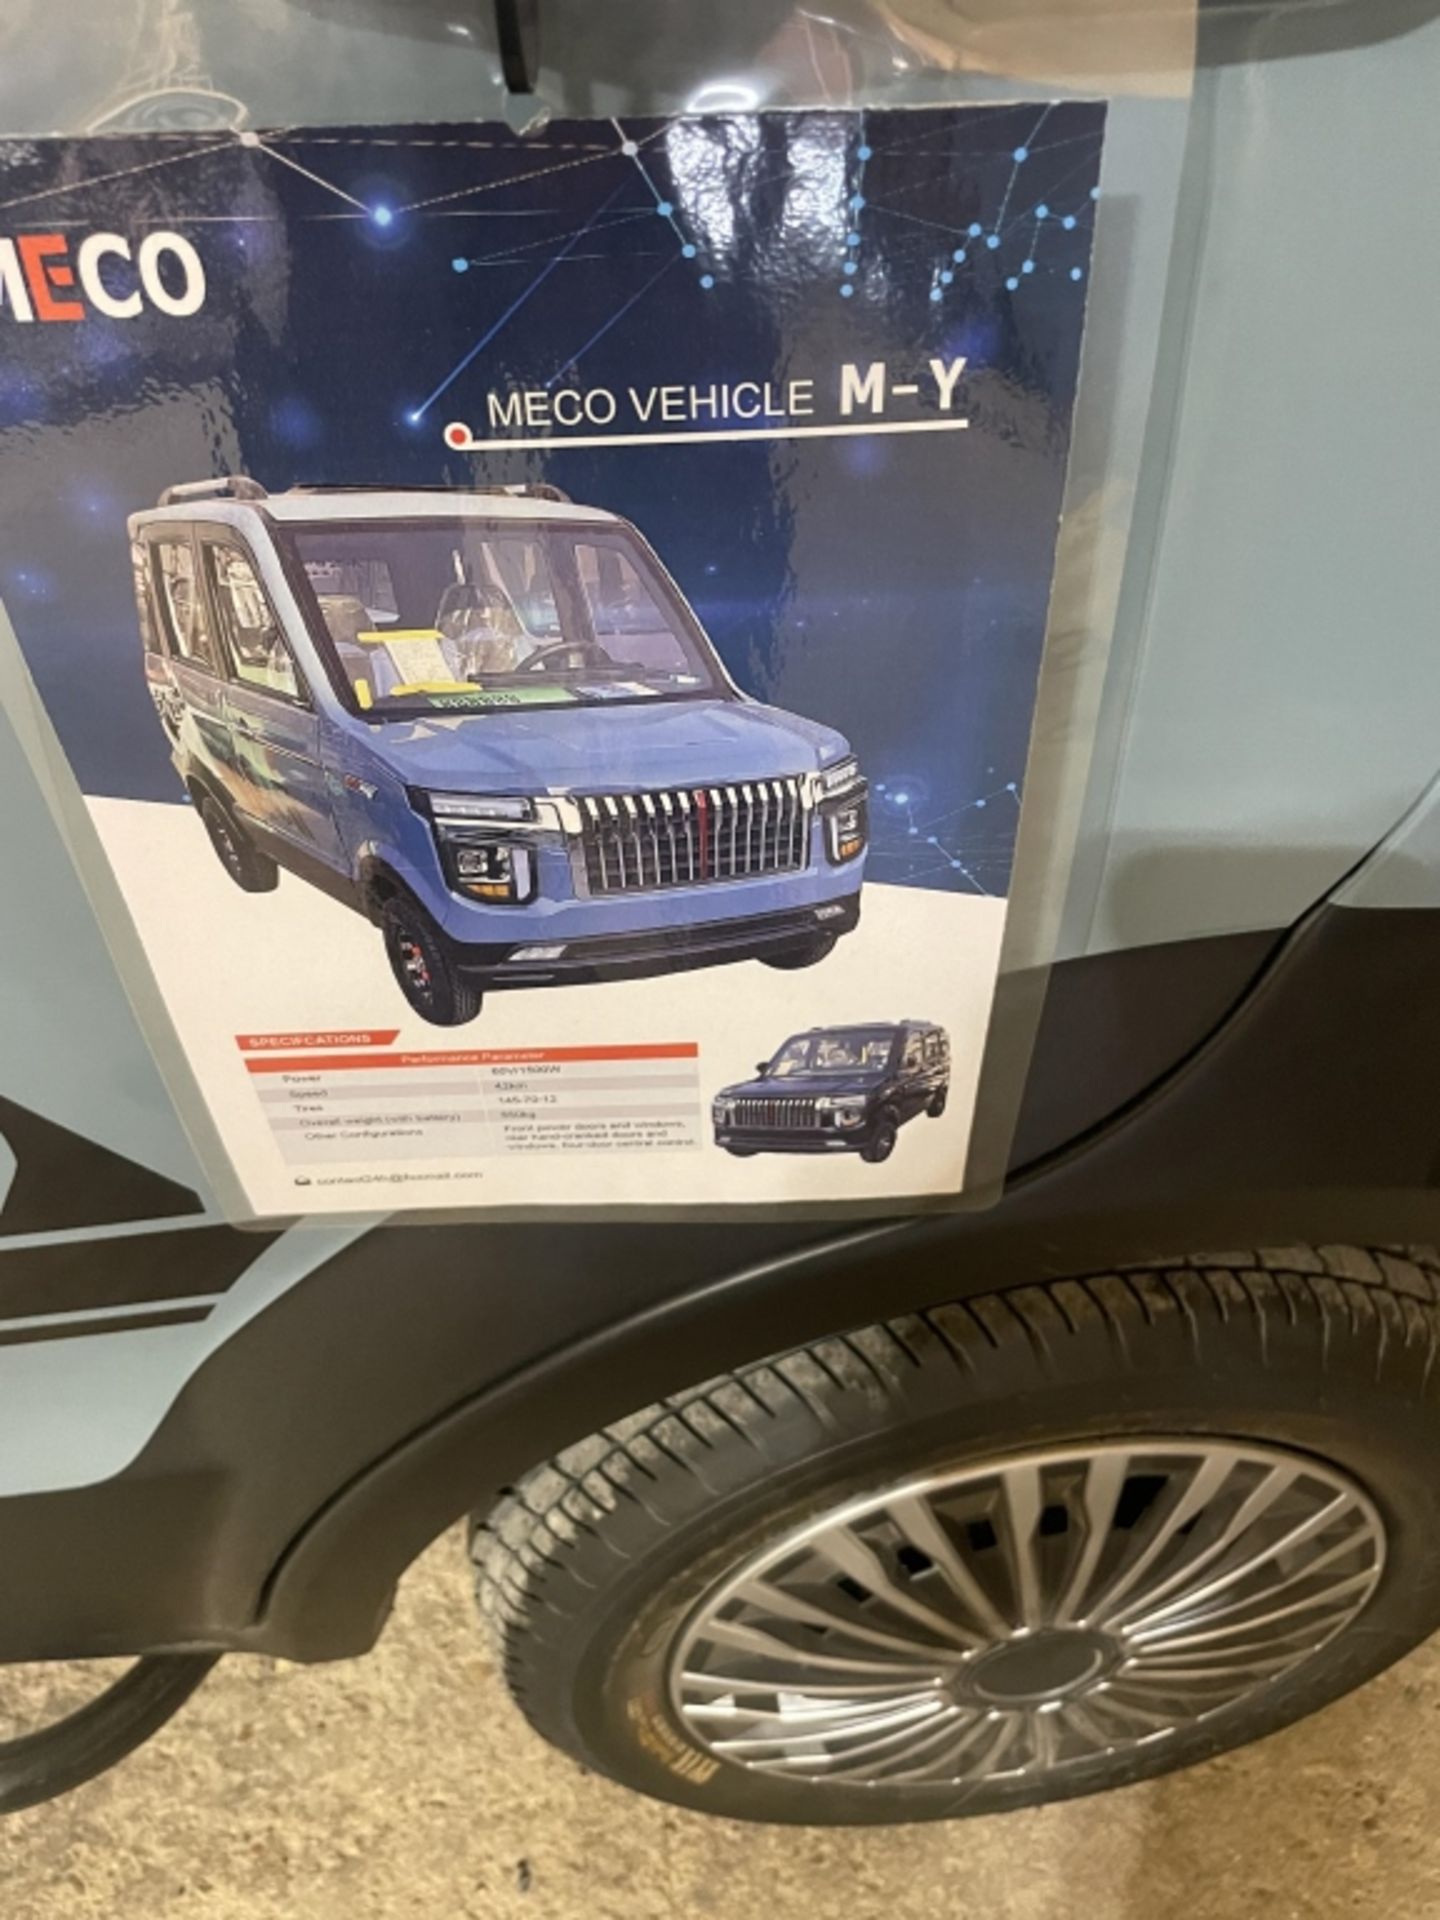 MECO M-Y Electric Vehicle - Image 13 of 15